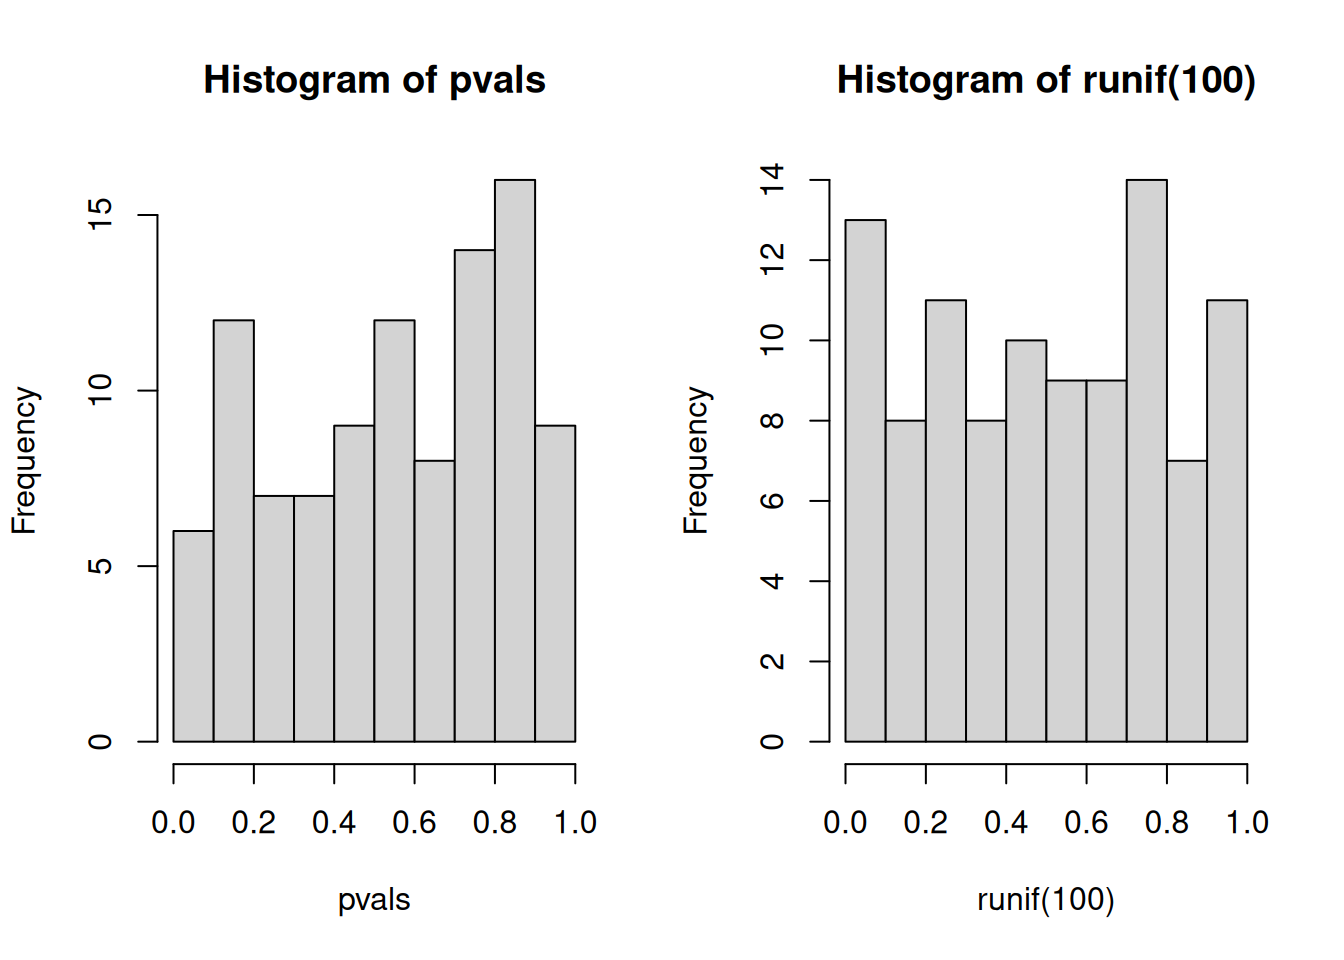 Distribution of p-values for the `tdata1` dataset (left) and 100 (p-)values uniformely distributed between 0 and 1 (right).